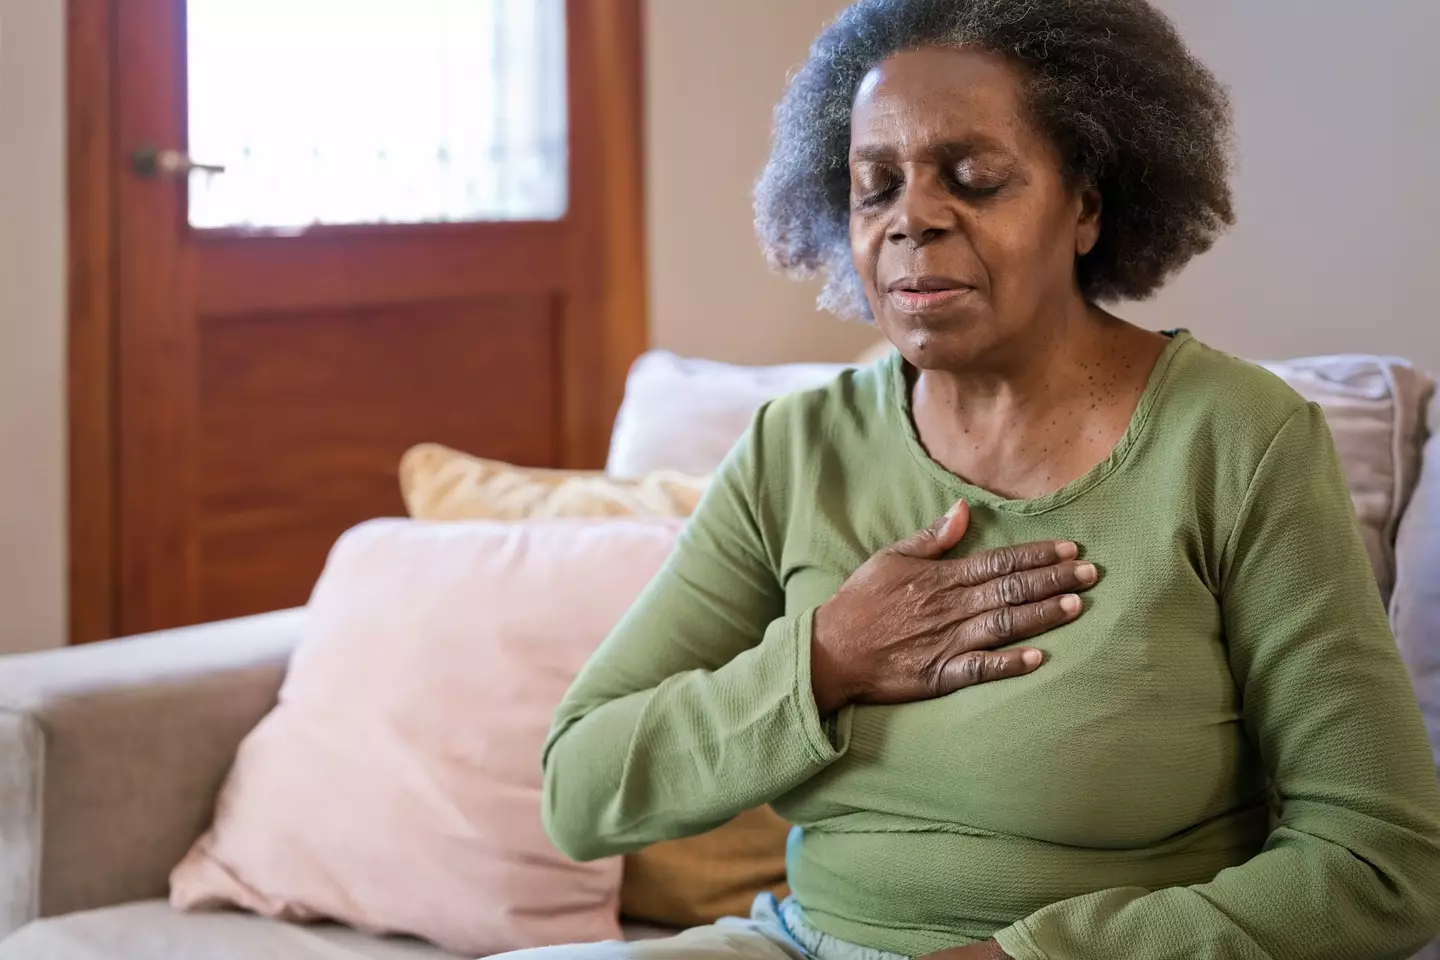 Research has found that women are more likely to receive the wrong diagnosis after a heart attack, which can put them at increased risk of a second one.